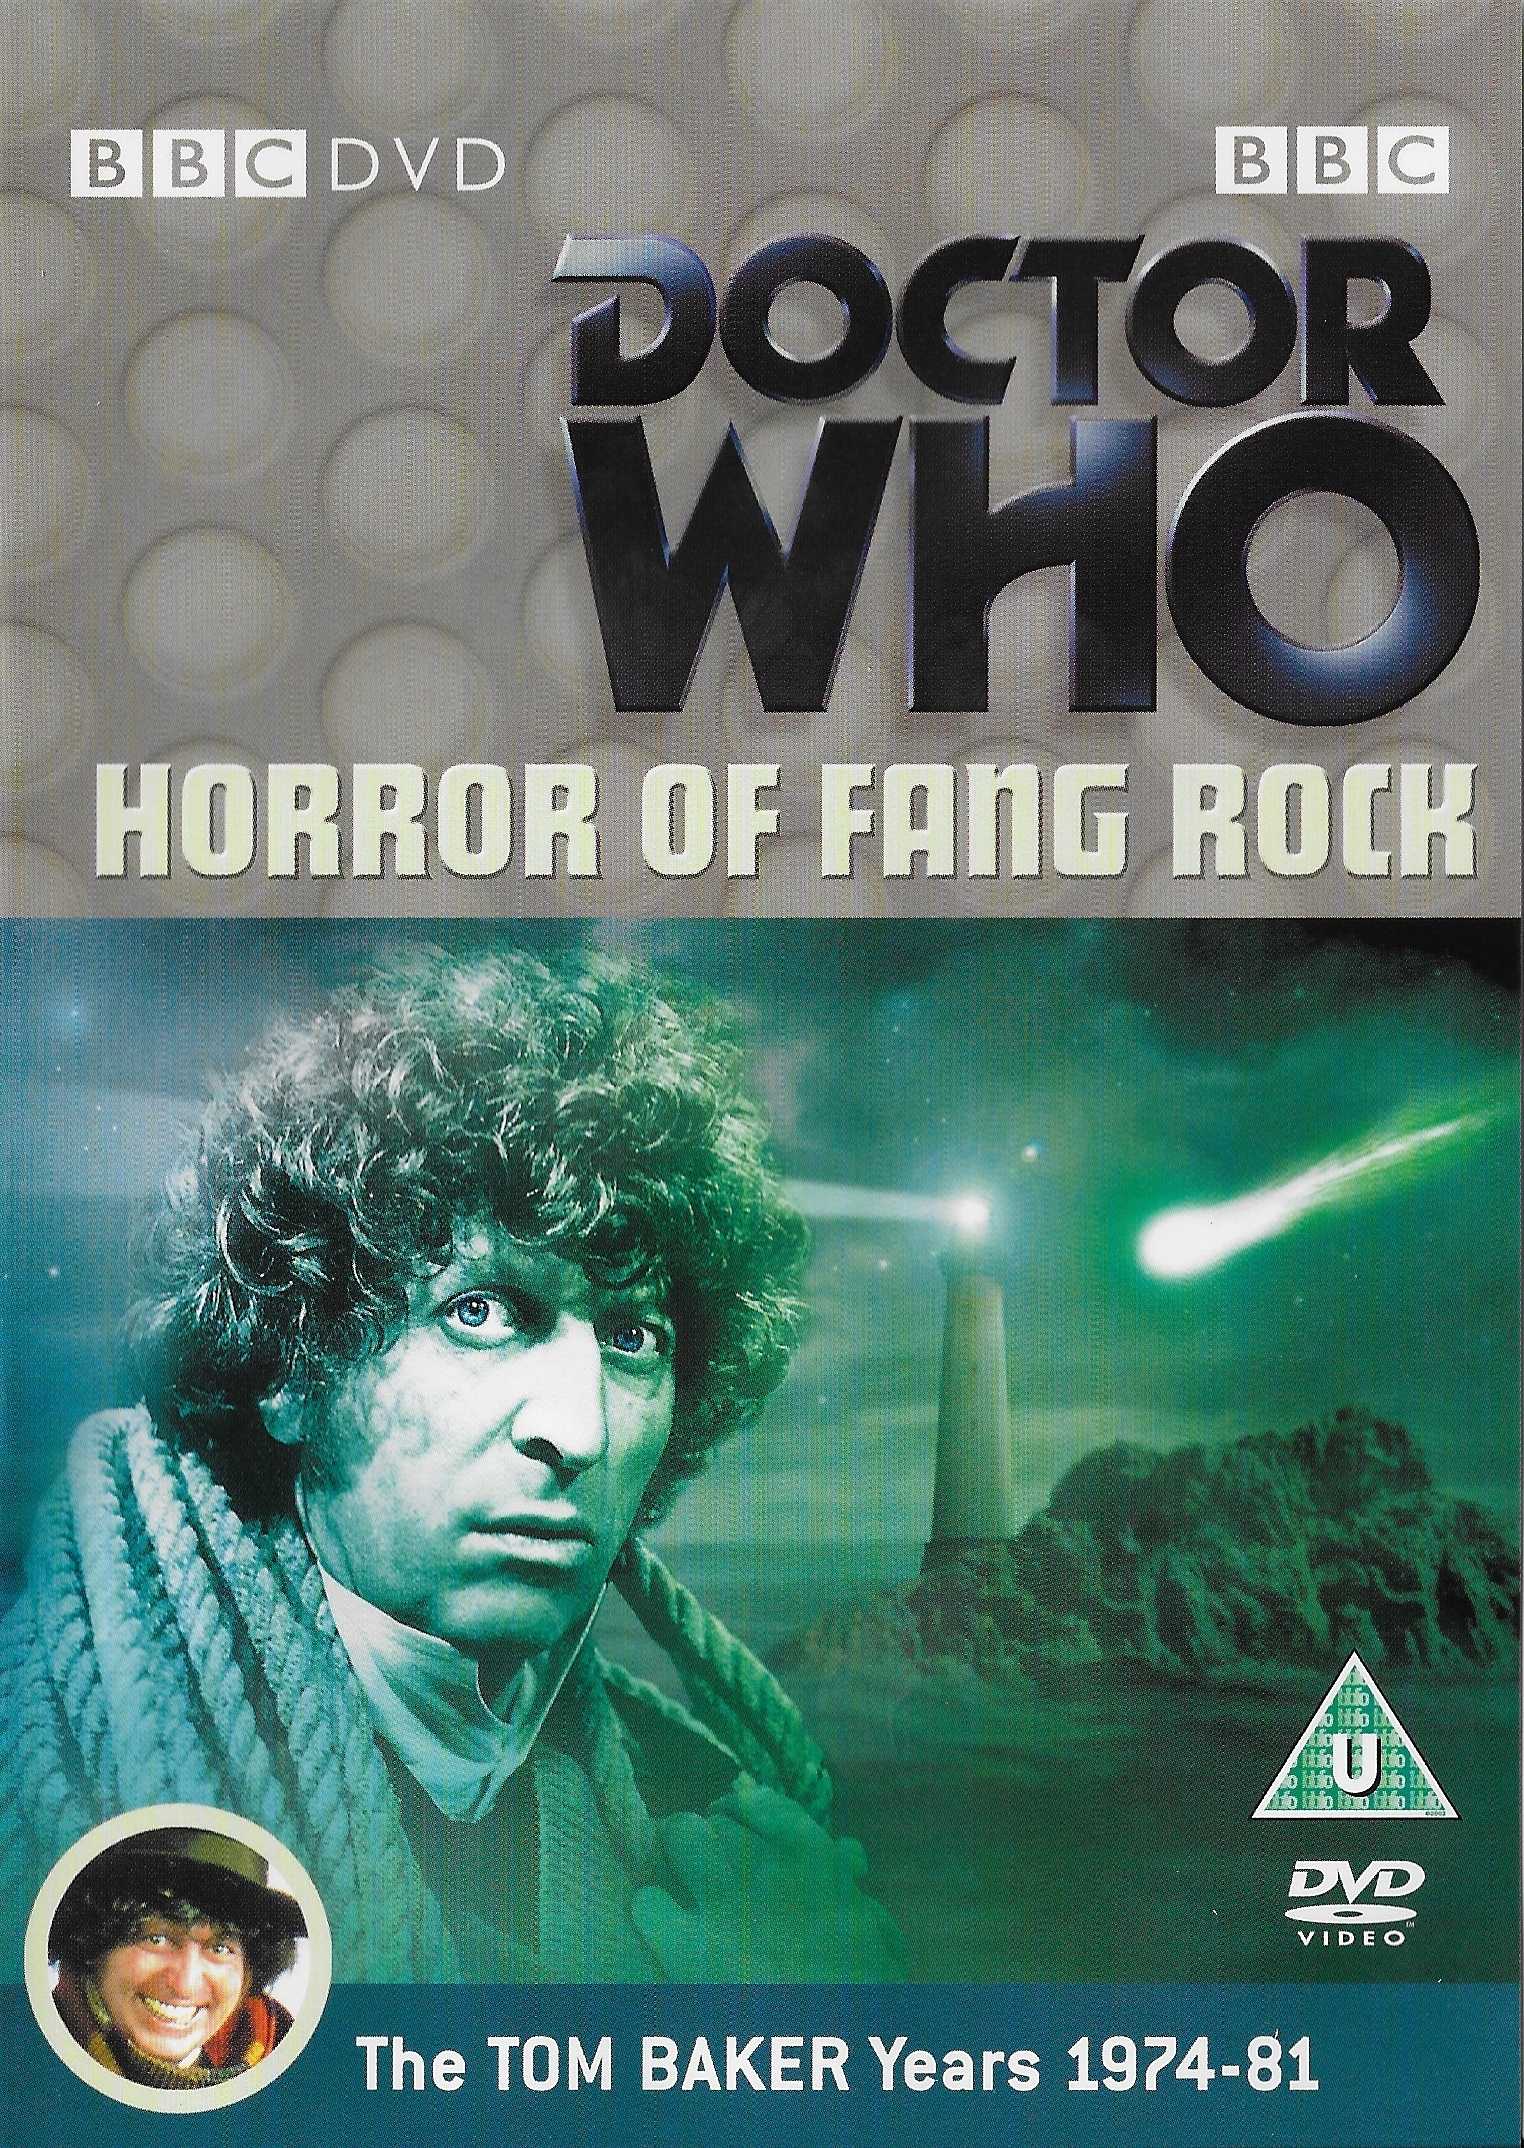 Picture of BBCDVD 1356 Doctor Who - Horror of fang rock by artist Terrance Dicks from the BBC records and Tapes library